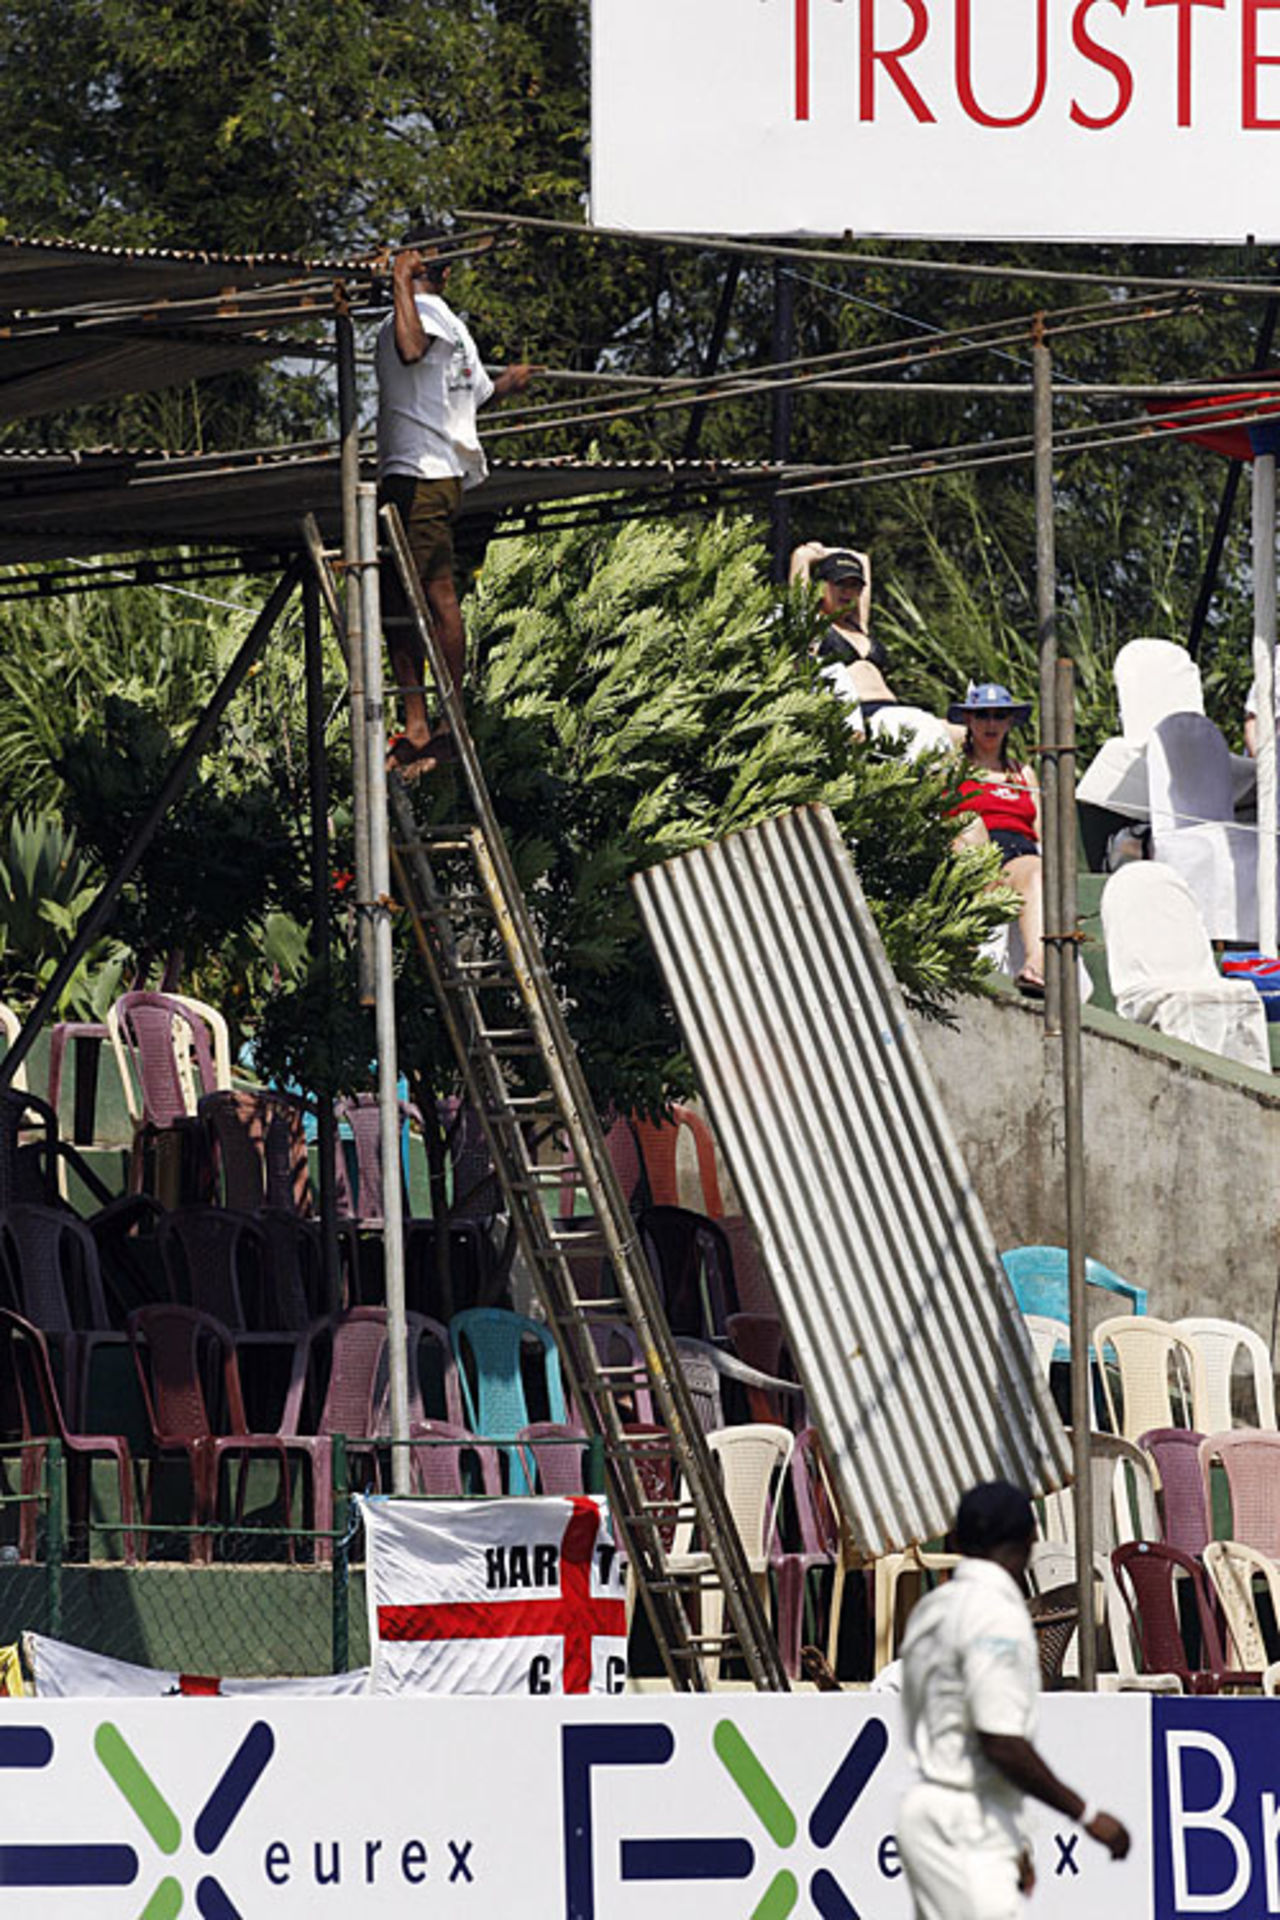 A portion of the roof fell down on to the seats below, Sri Lanka v England, 1st Test, Kandy, December 5, 2007